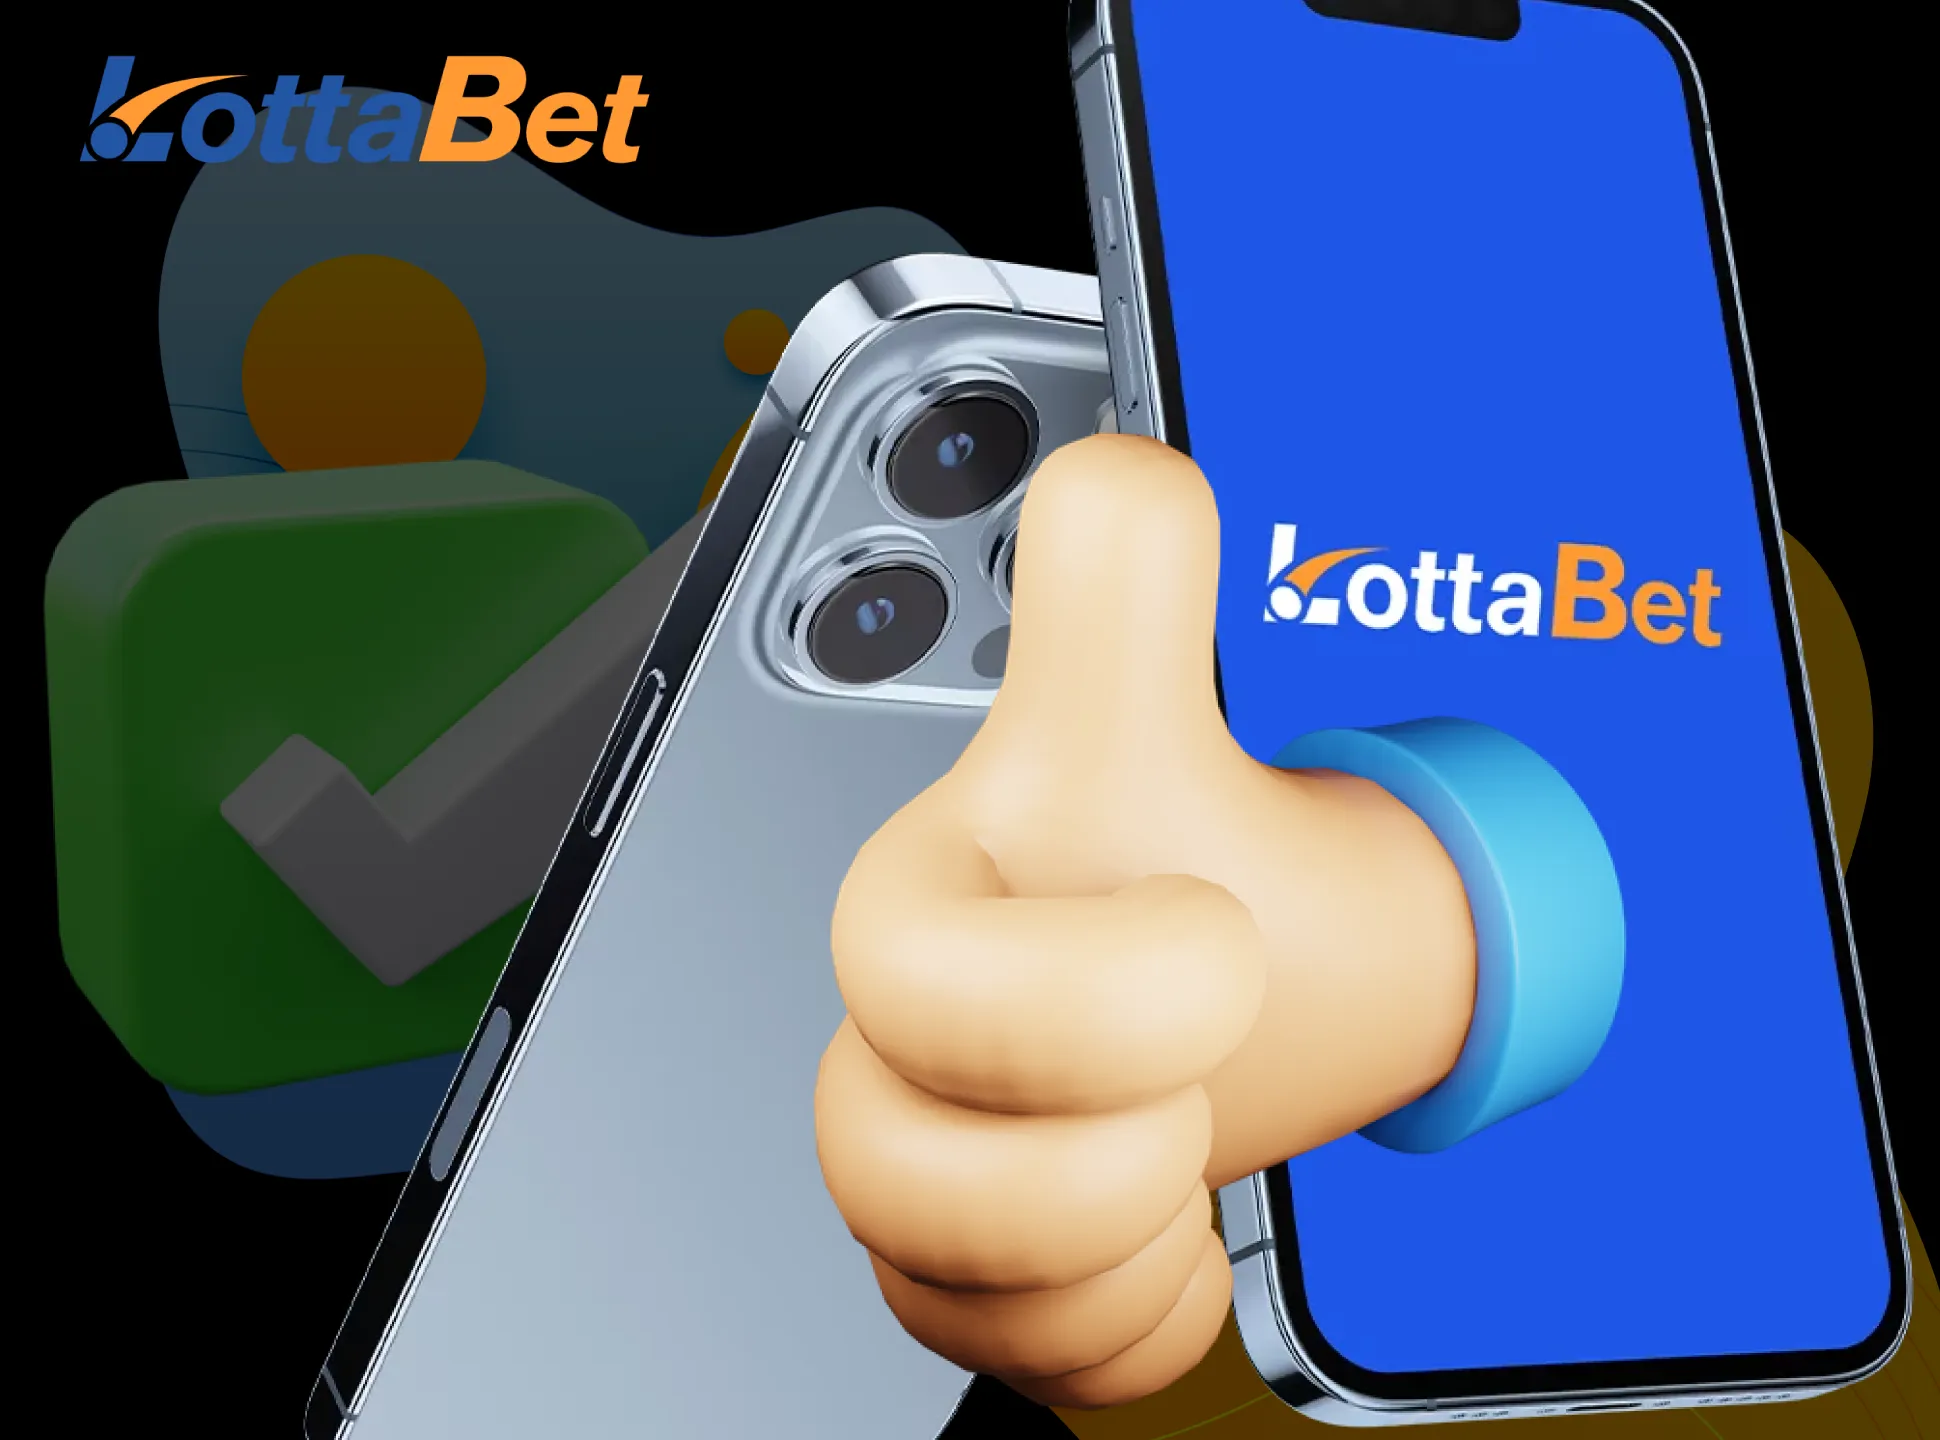 Lottabet betting and casino company is a legal and safe way to spenf your time with fun and profit.